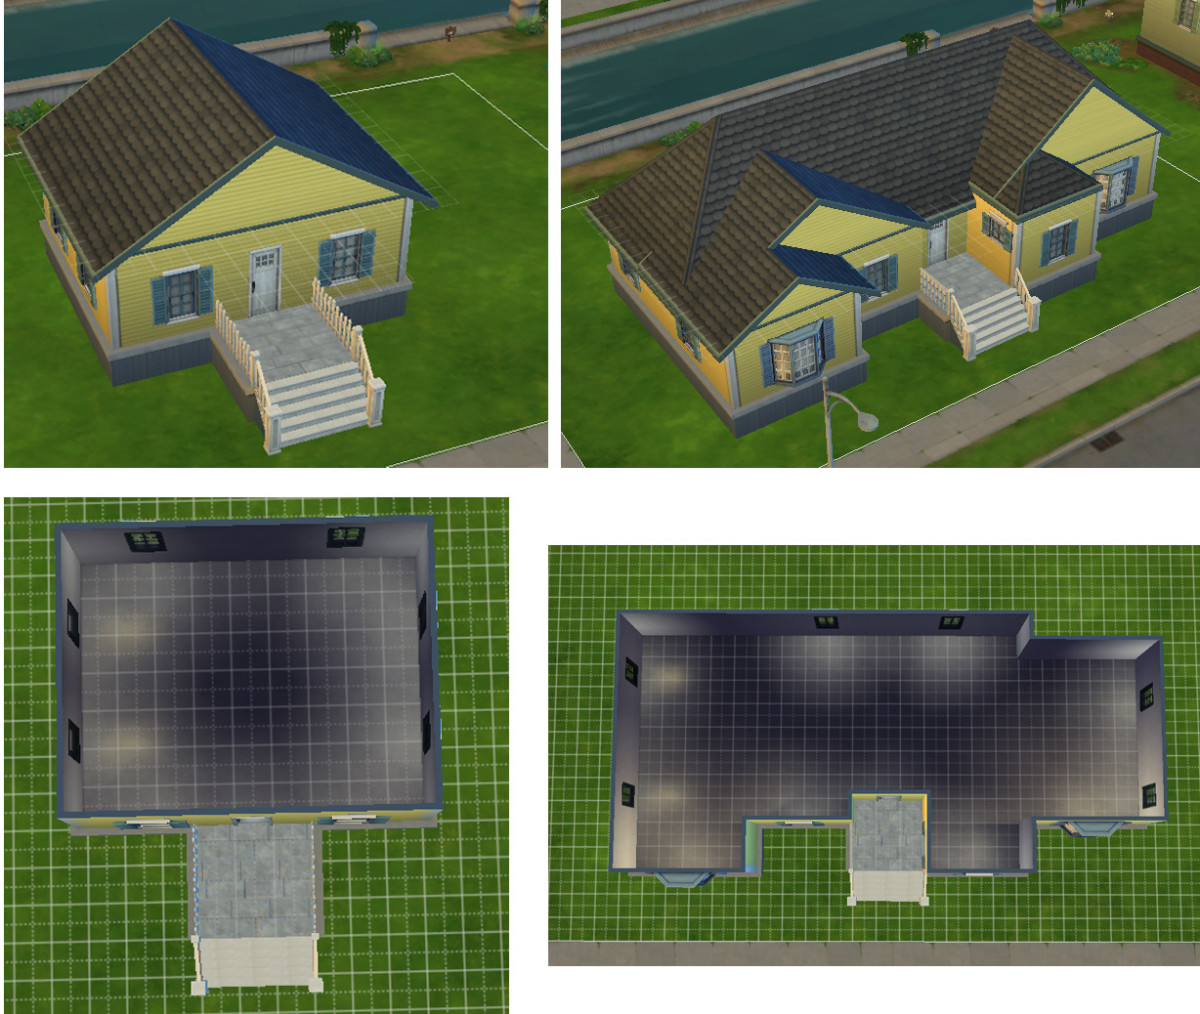 I took this plain old boxy house on the left, widened it, and added a few more box shapes jutting out, and added several roof parts to it in order to create this more interesting home on the right.